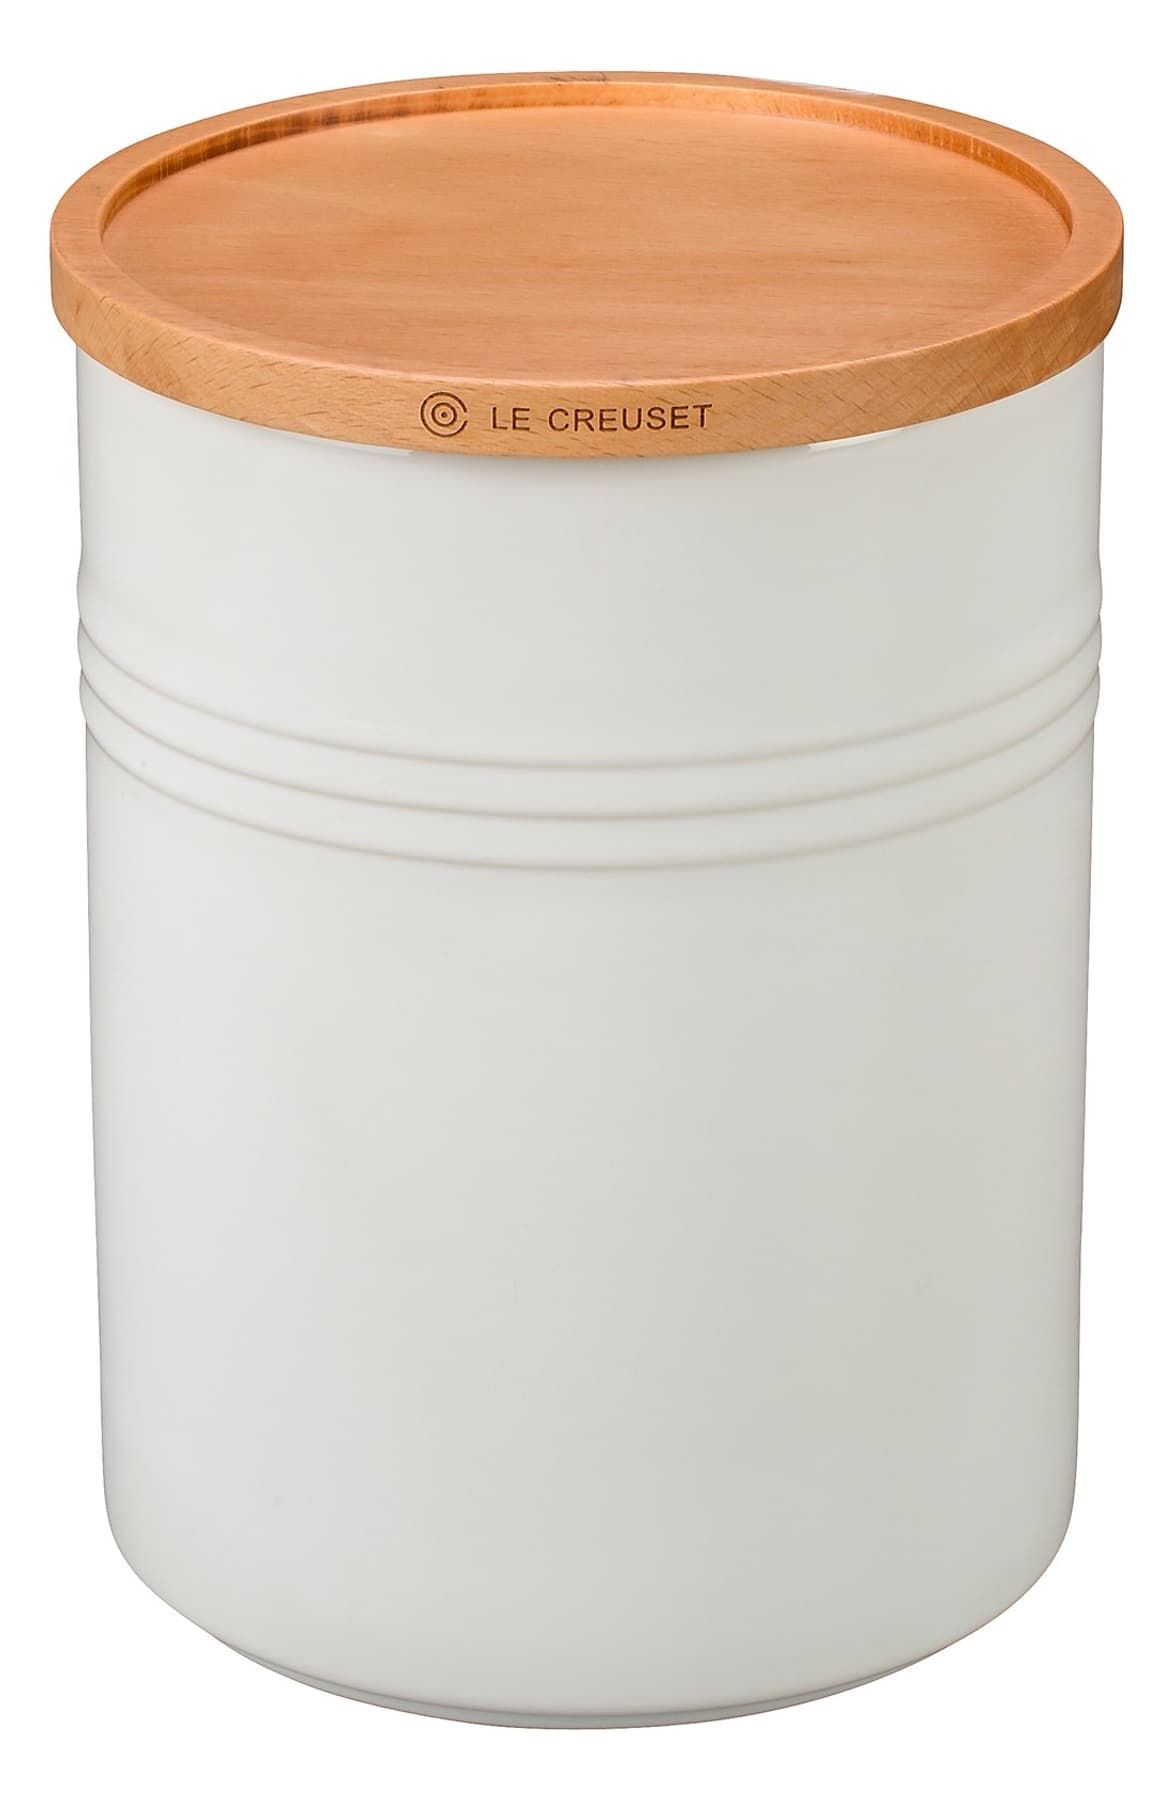 Glazed 22 Ounce Stoneware Storage Canister with Wooden Lid Le Creuset